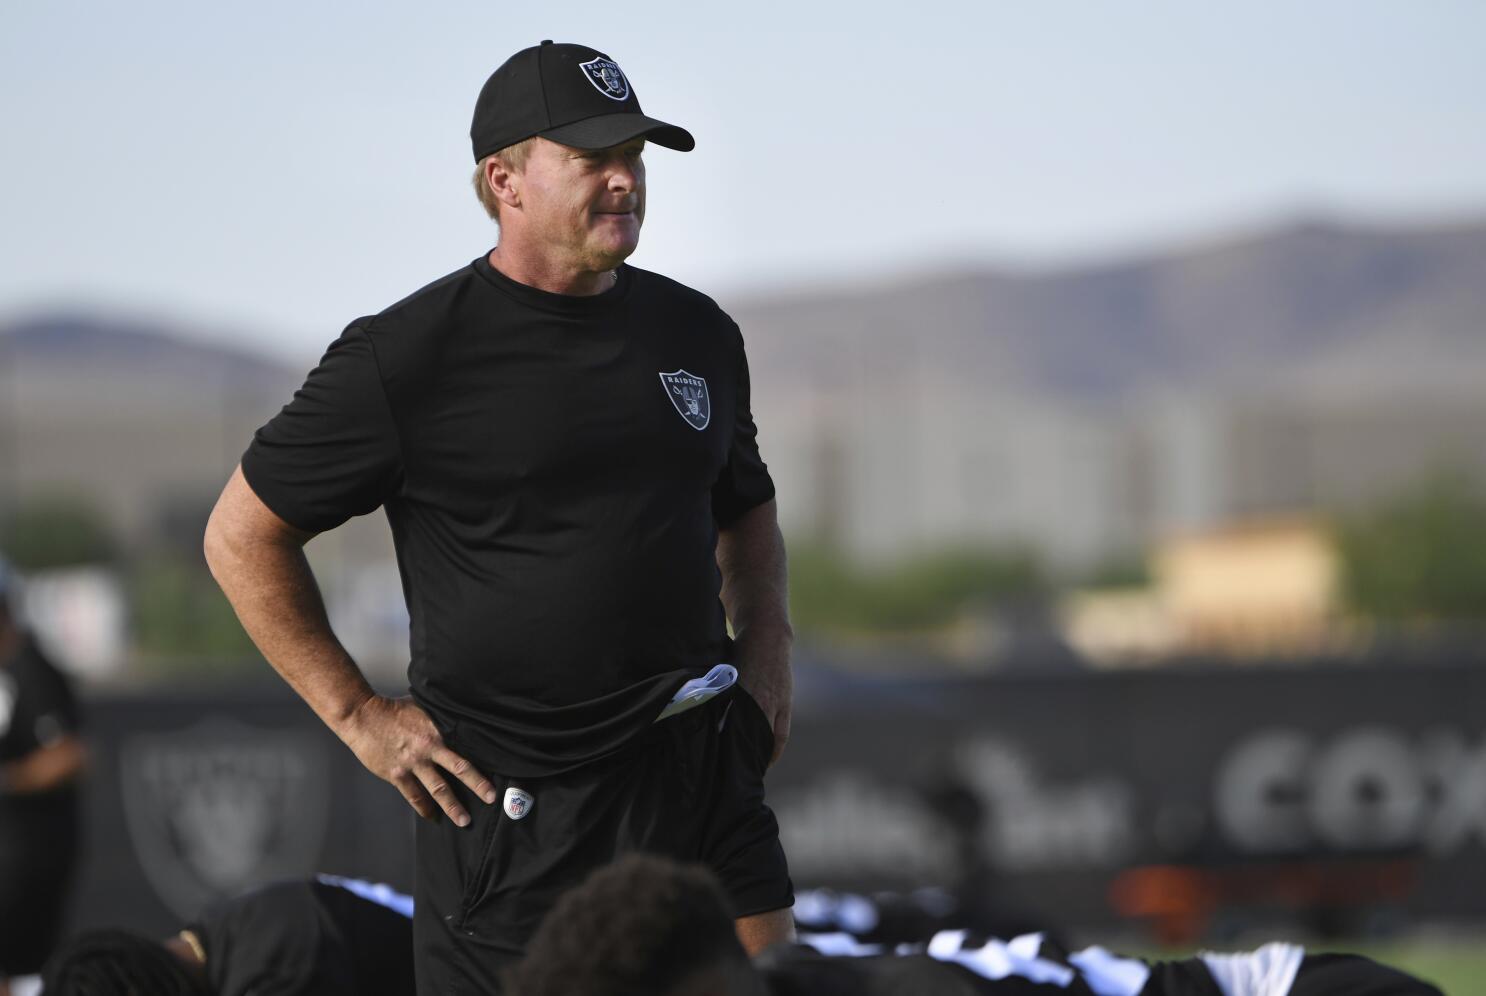 Las Vegas Raiders will require all fans to get vaccinated if they